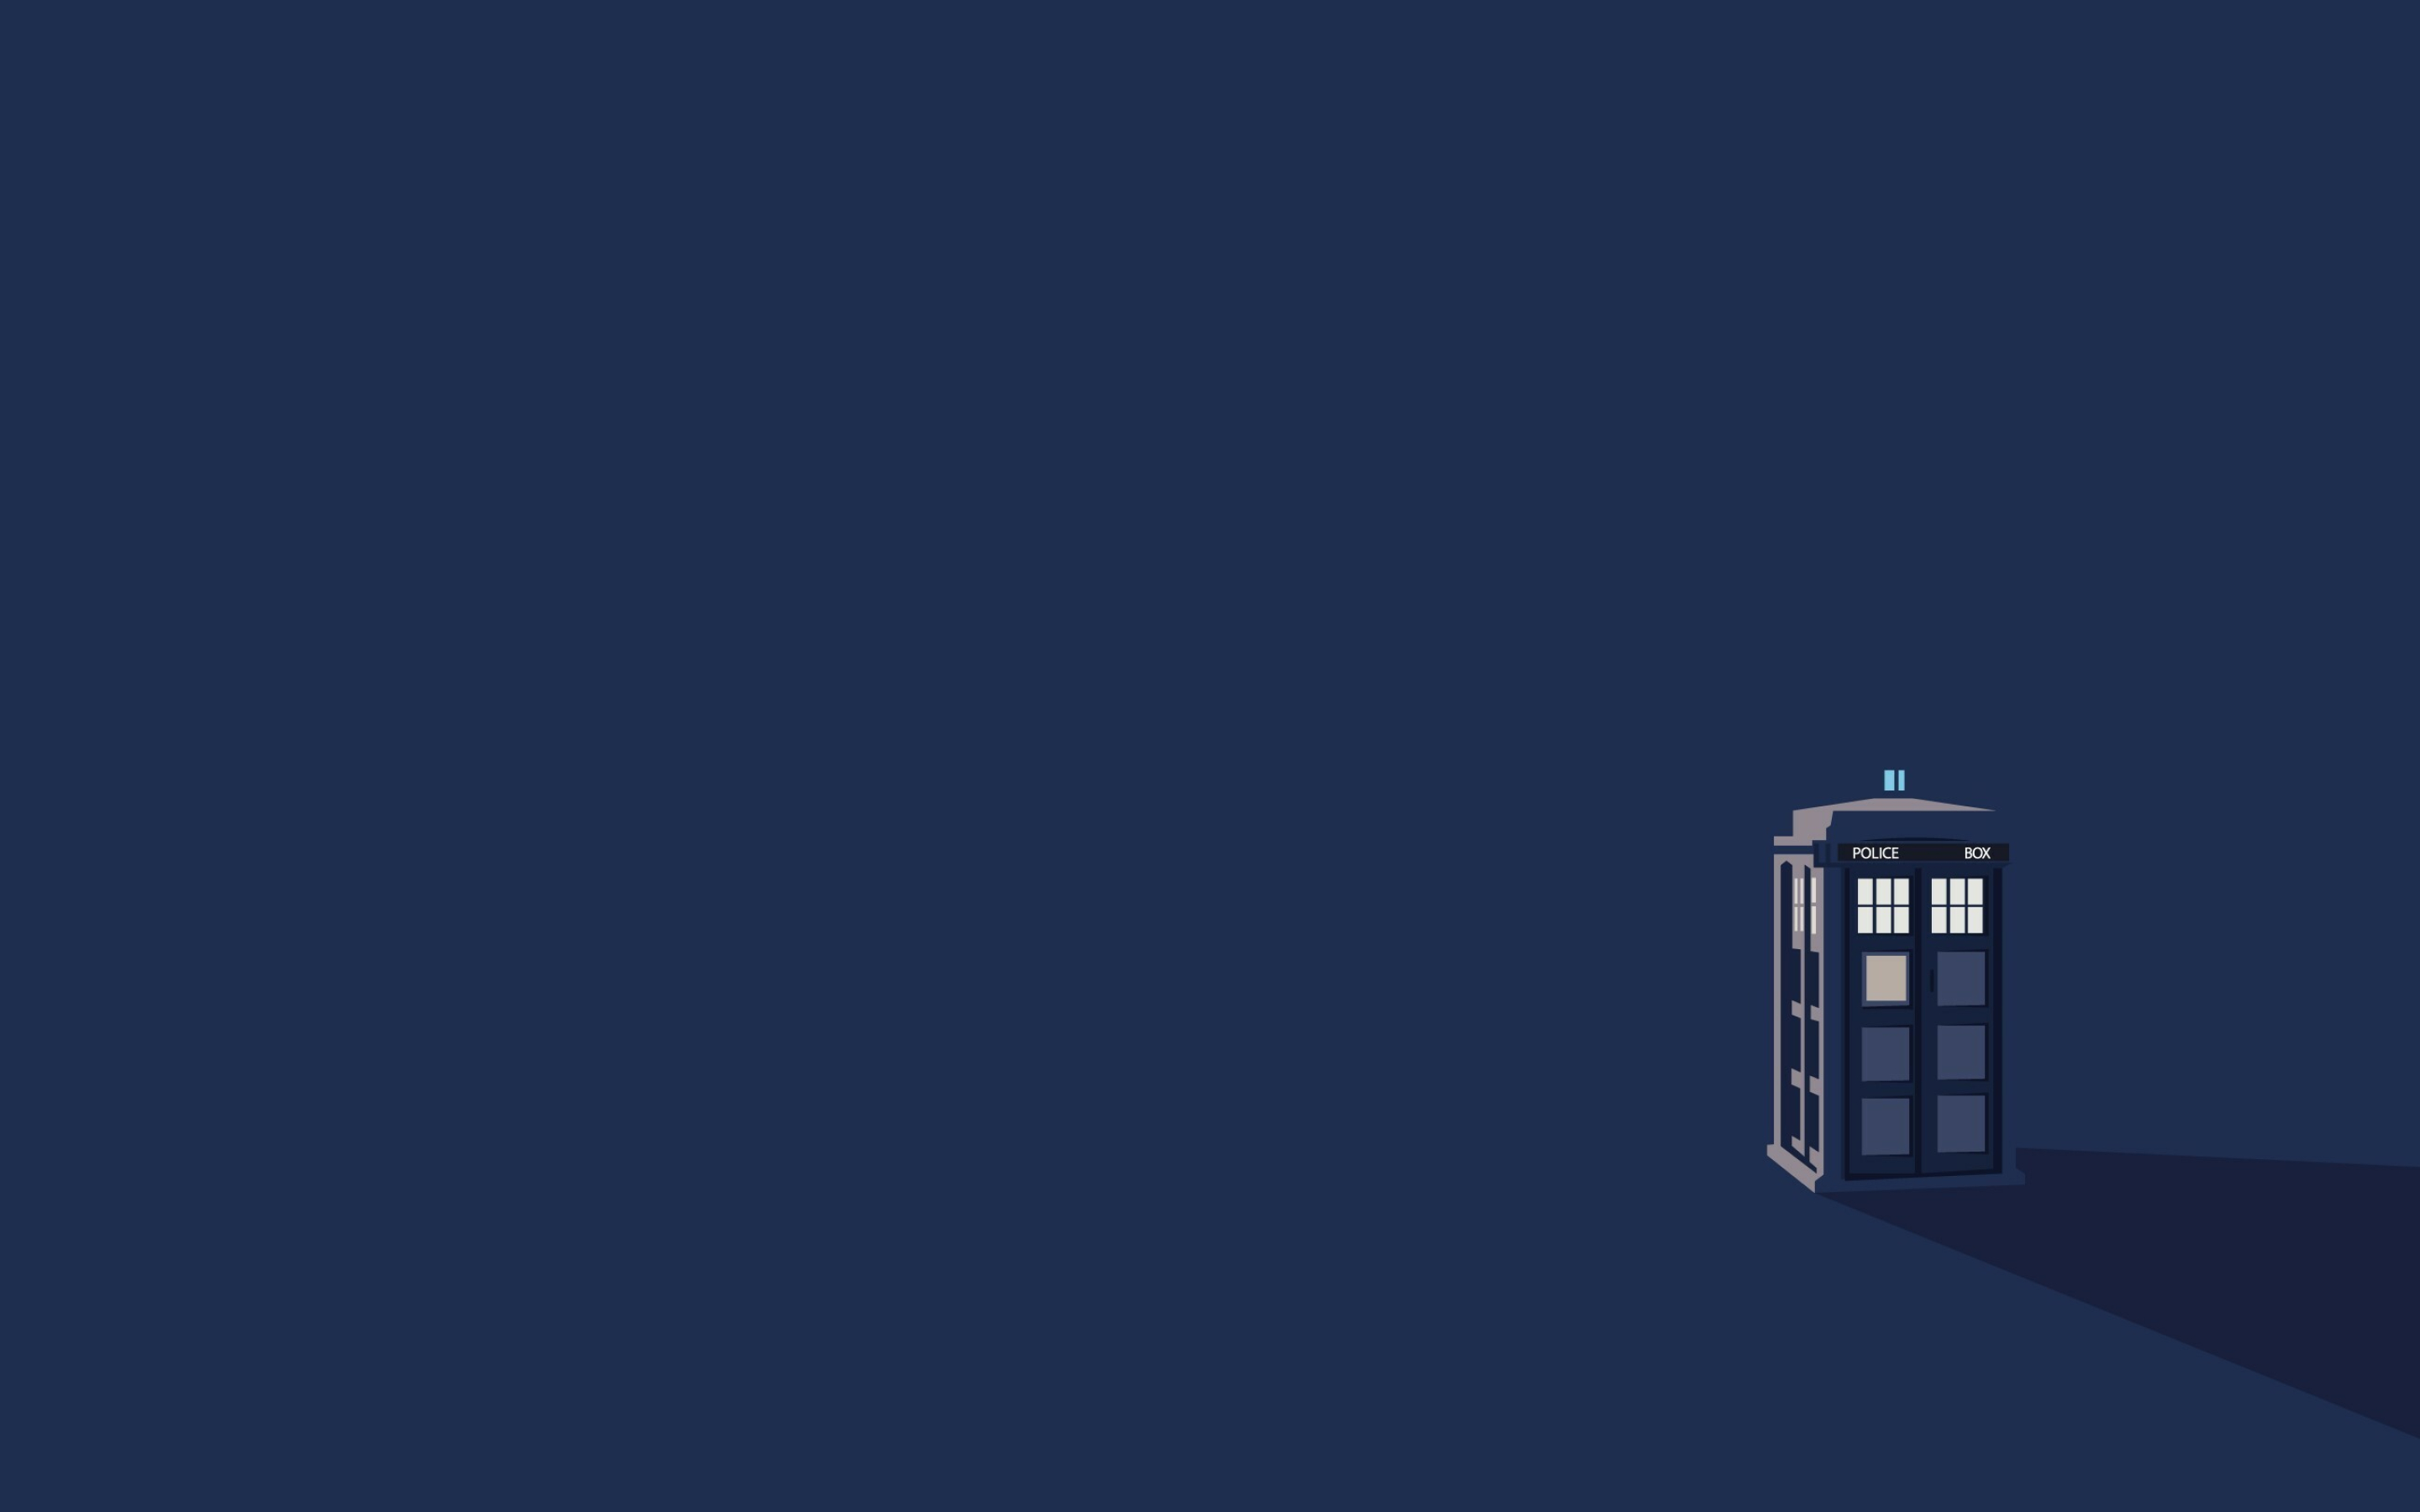 Doctor Who: Tardis Police box, "Time And Relative Dimension In Space", TV show. 2880x1800 HD Wallpaper.